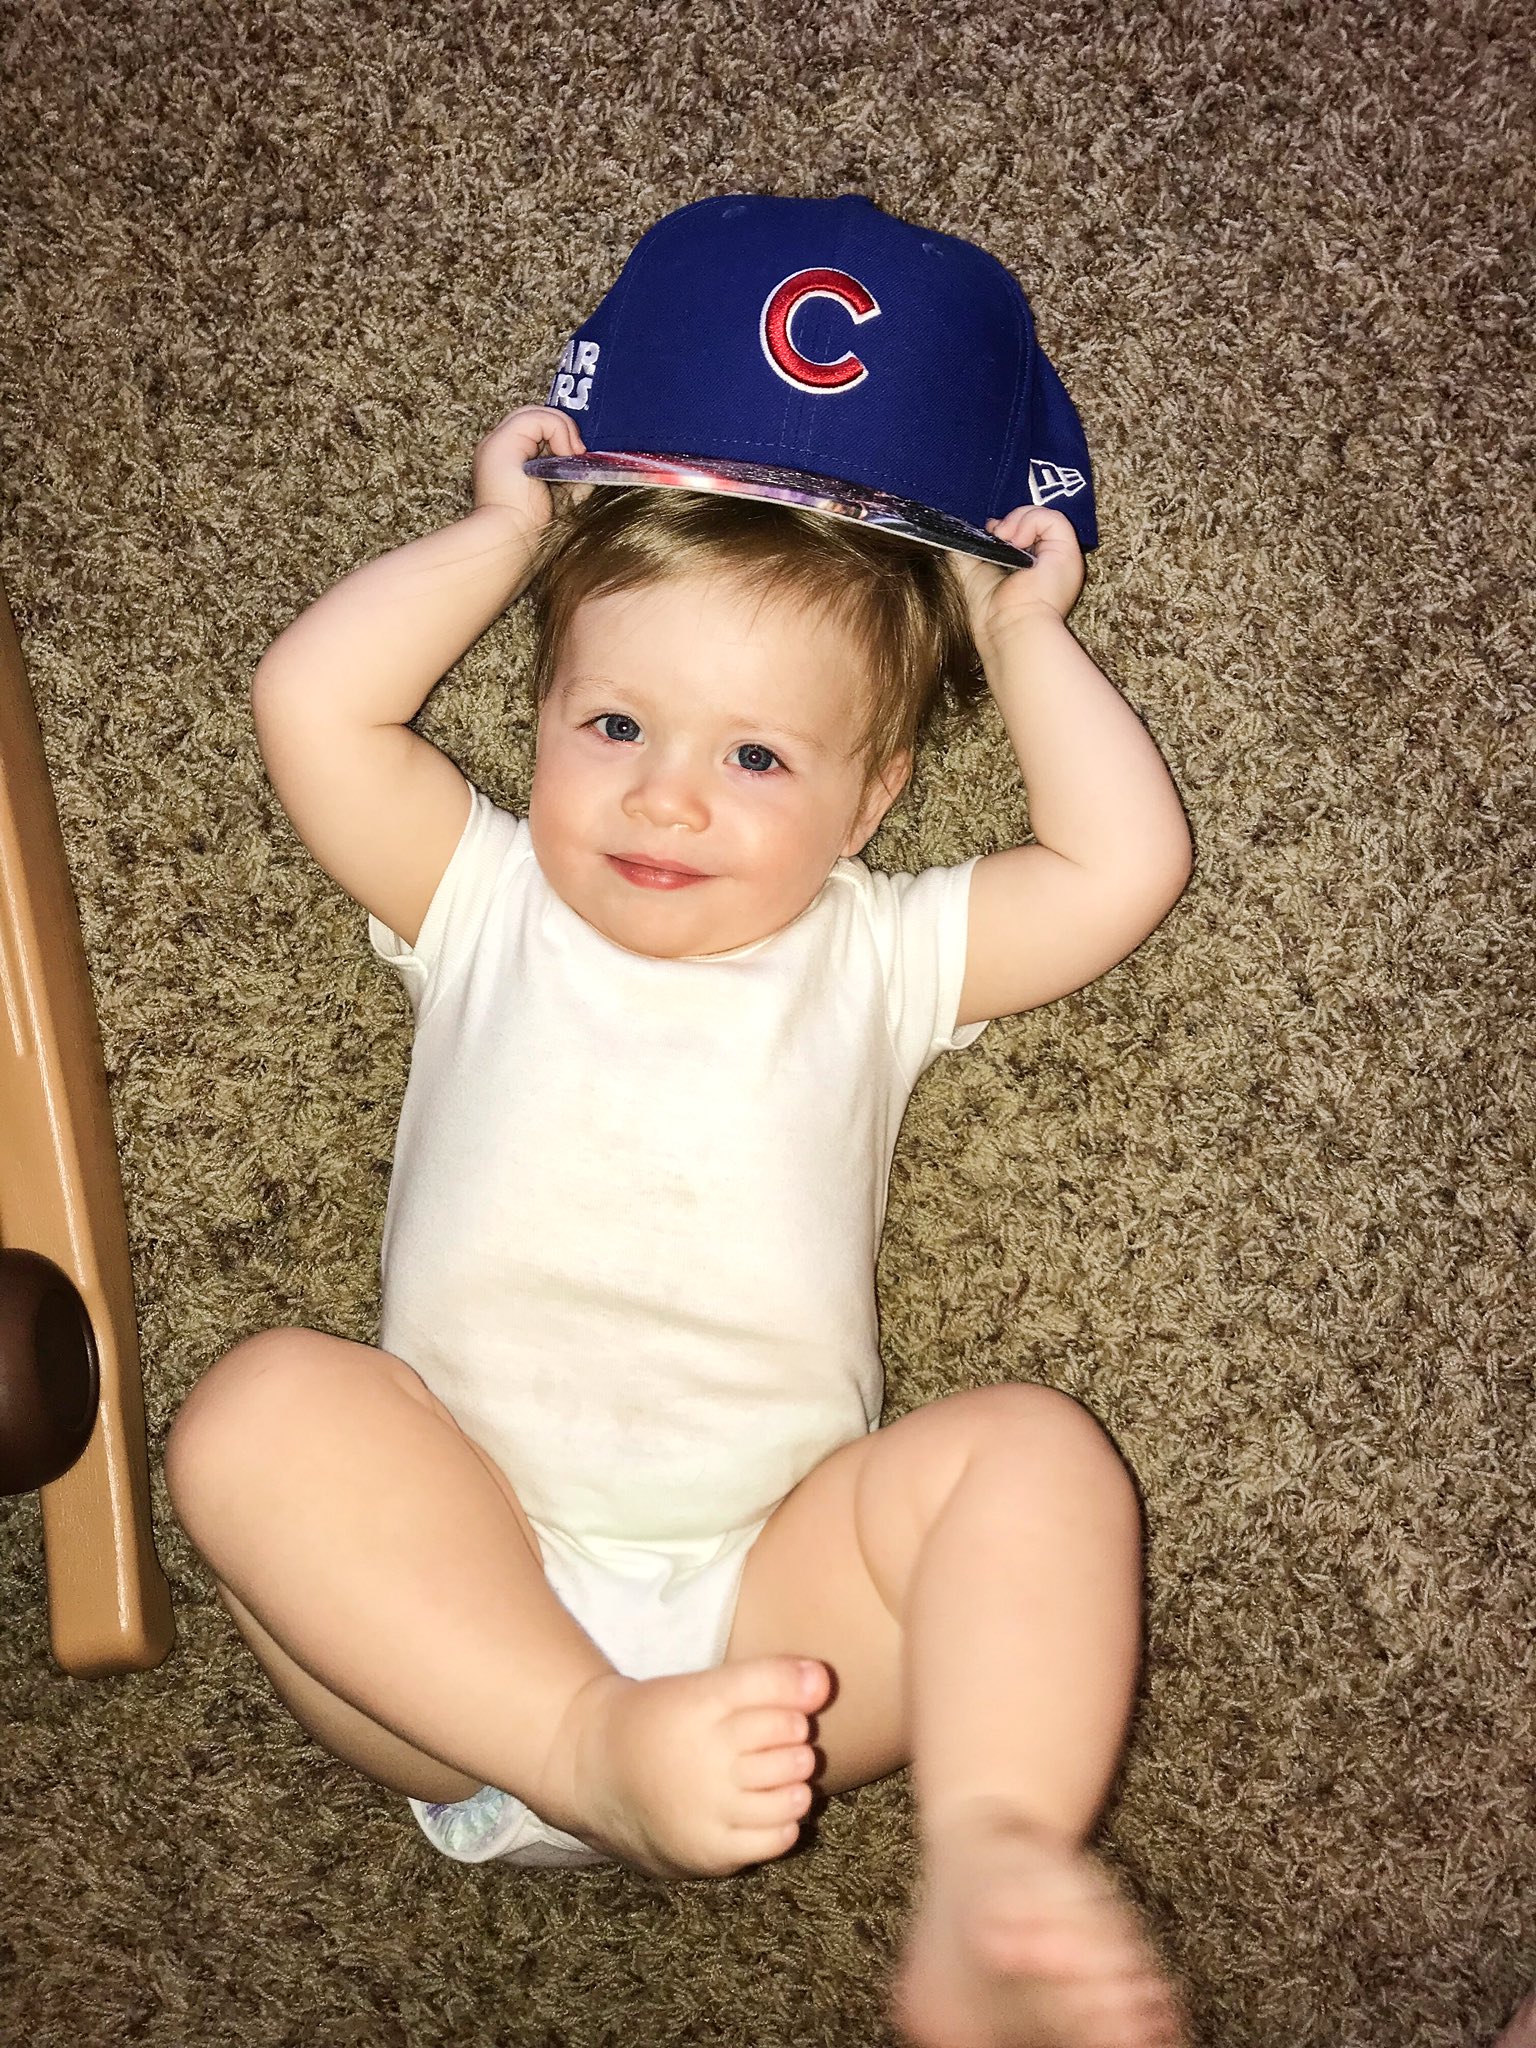 Matt L. Stephens on X: I kept her up past her bedtime to watch Kyle  Schwarber try to win the home run derby. So close! (Don't tell mom.)   / X